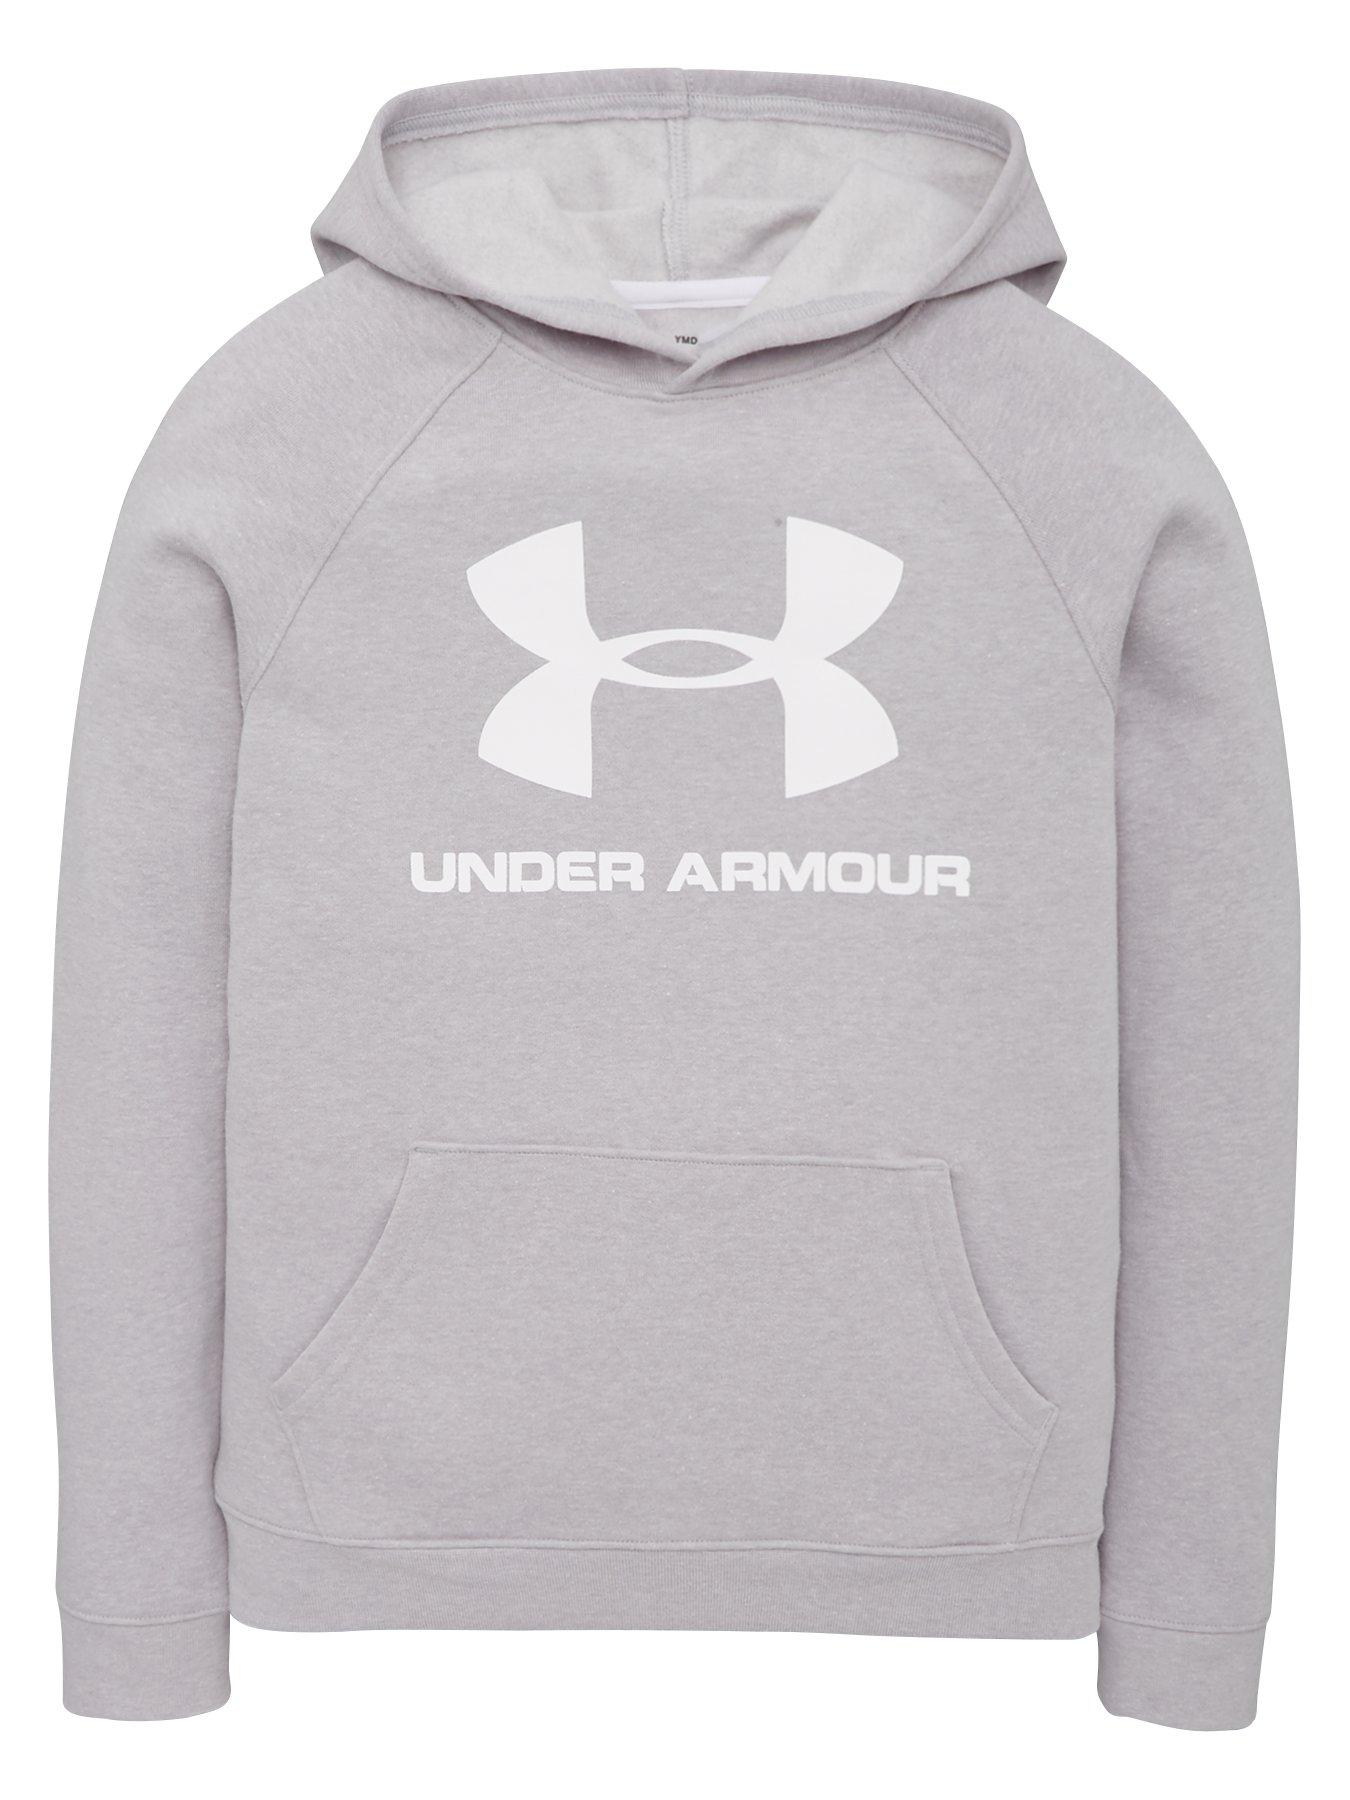 Under Armour Boys' Active Hoodie Pullover Lightweight Graphite Gray  4 & 5 